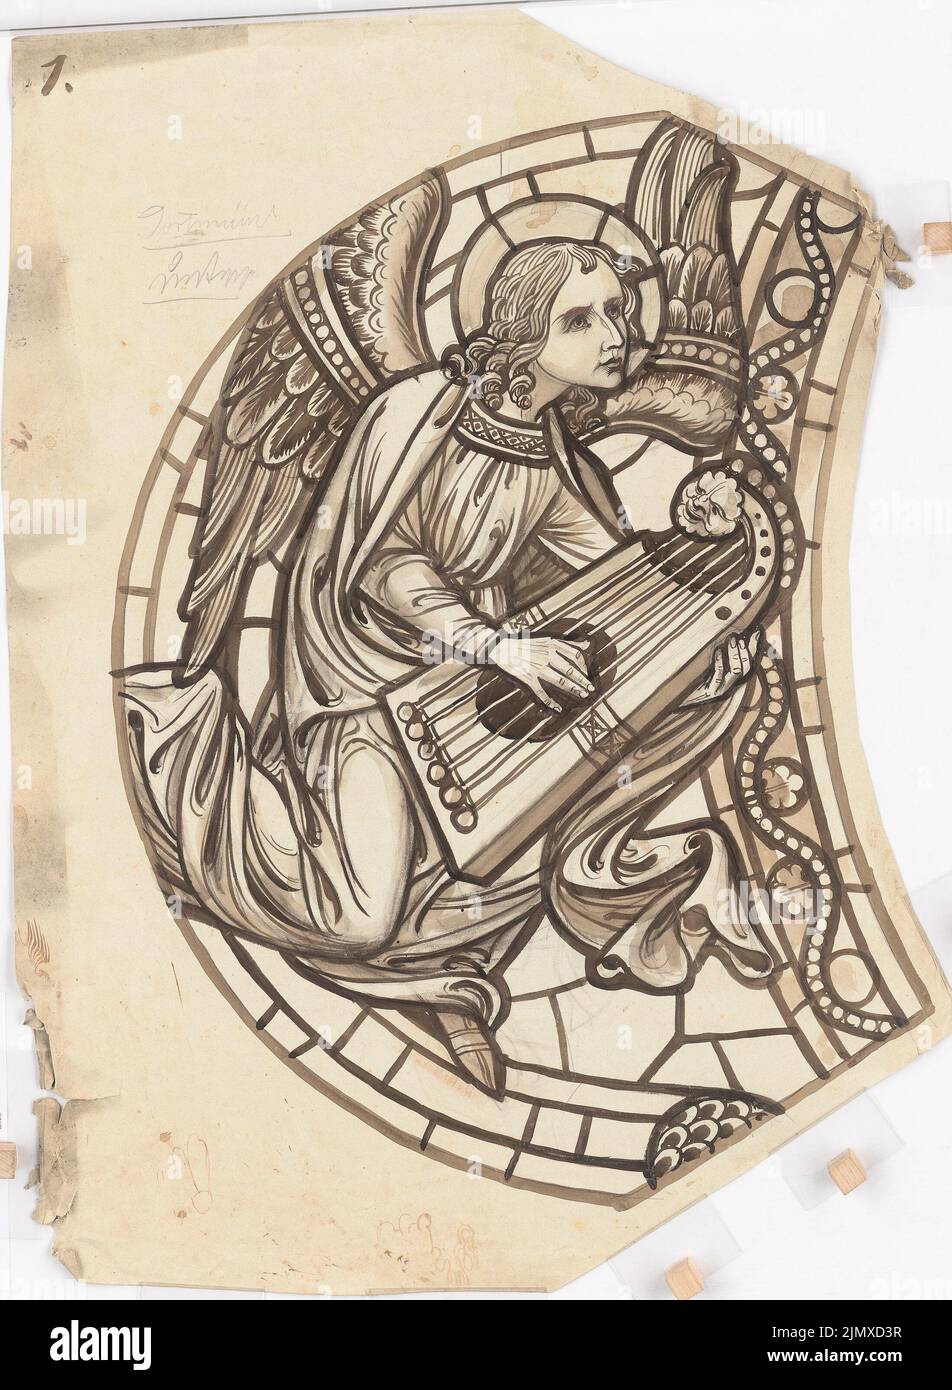 Klomp Johannes Franziskus (1865-1946), grave monuments, altars and church details (0-0): Design for church windows with a loud angel for a church in Dortmund. Ink, pencil on cardboard, 91.1 x 66.7 cm (including scan edges) Klomp Johannes Franziskus  (1865-1946): Grabdenkmäler, Altäre und Kirchendetails Stock Photo